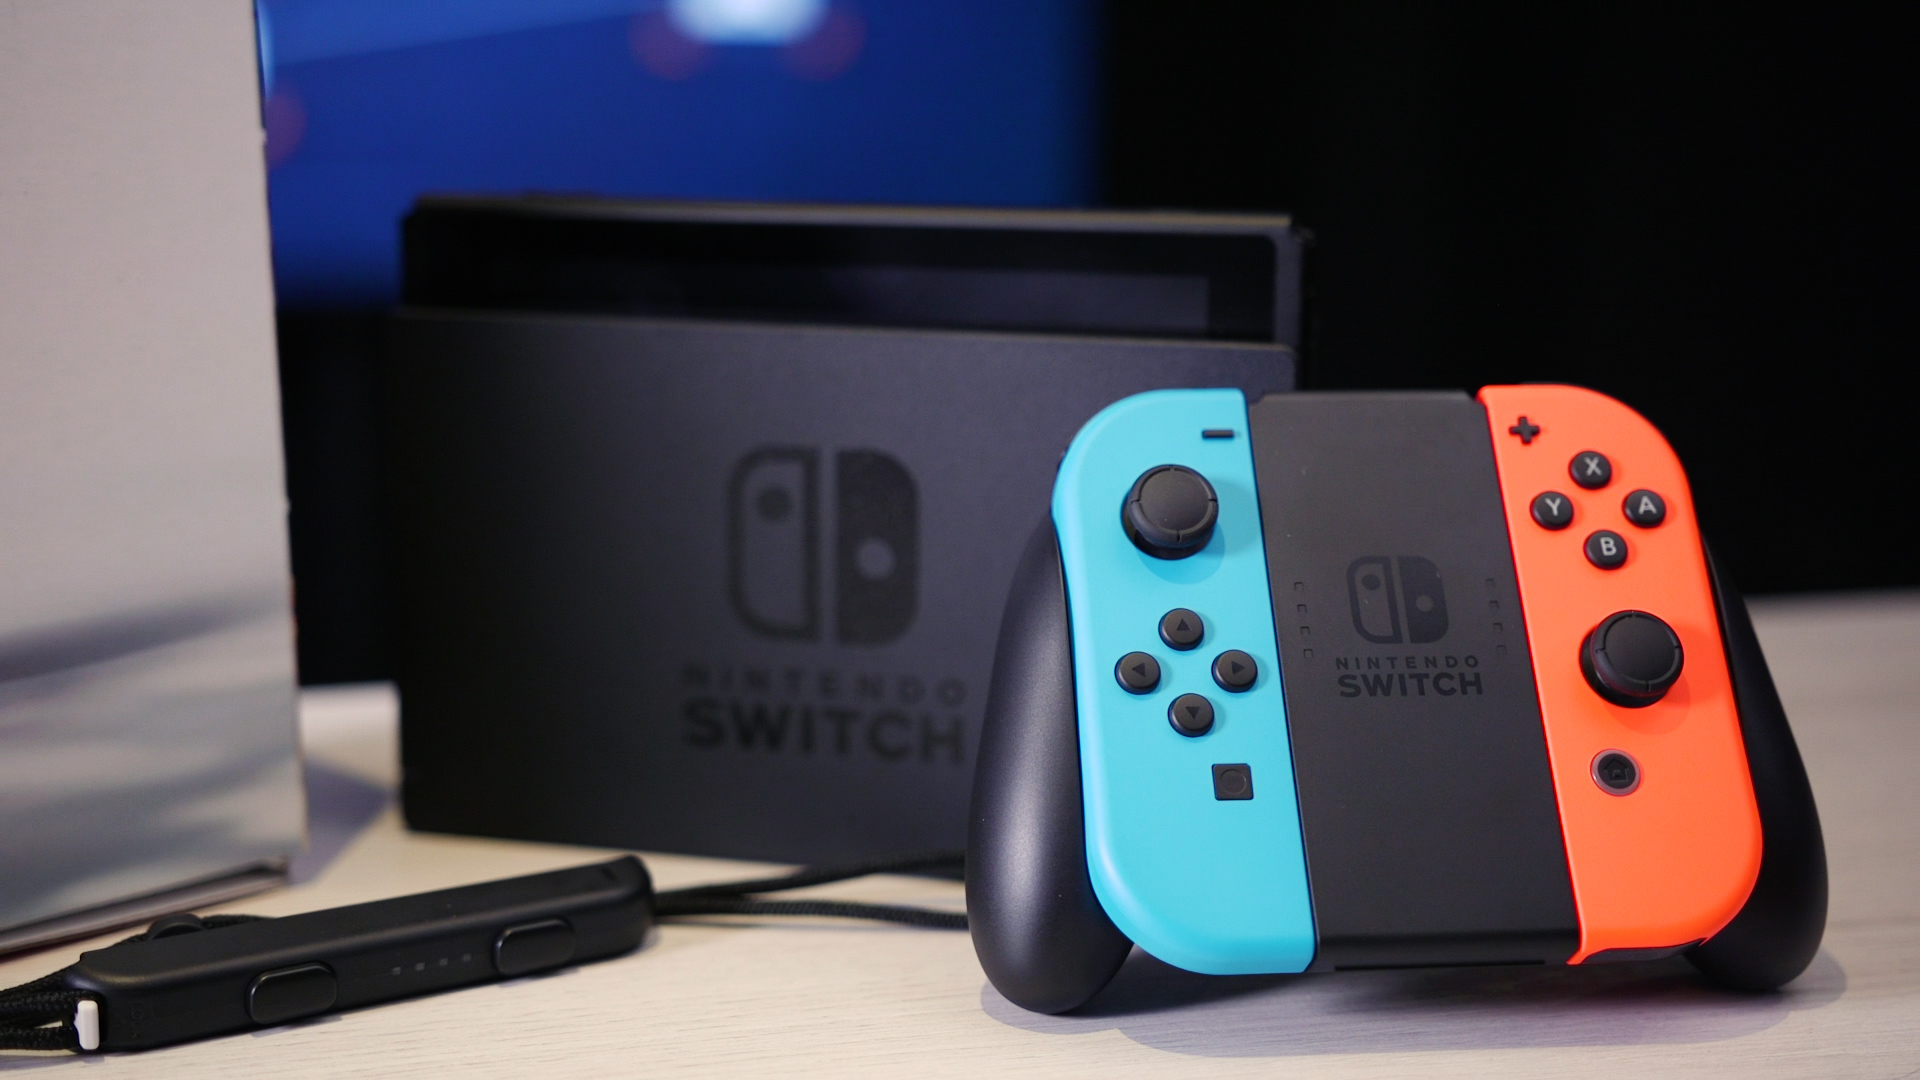 Nintendo Switch has already outsold the entire Wii U run